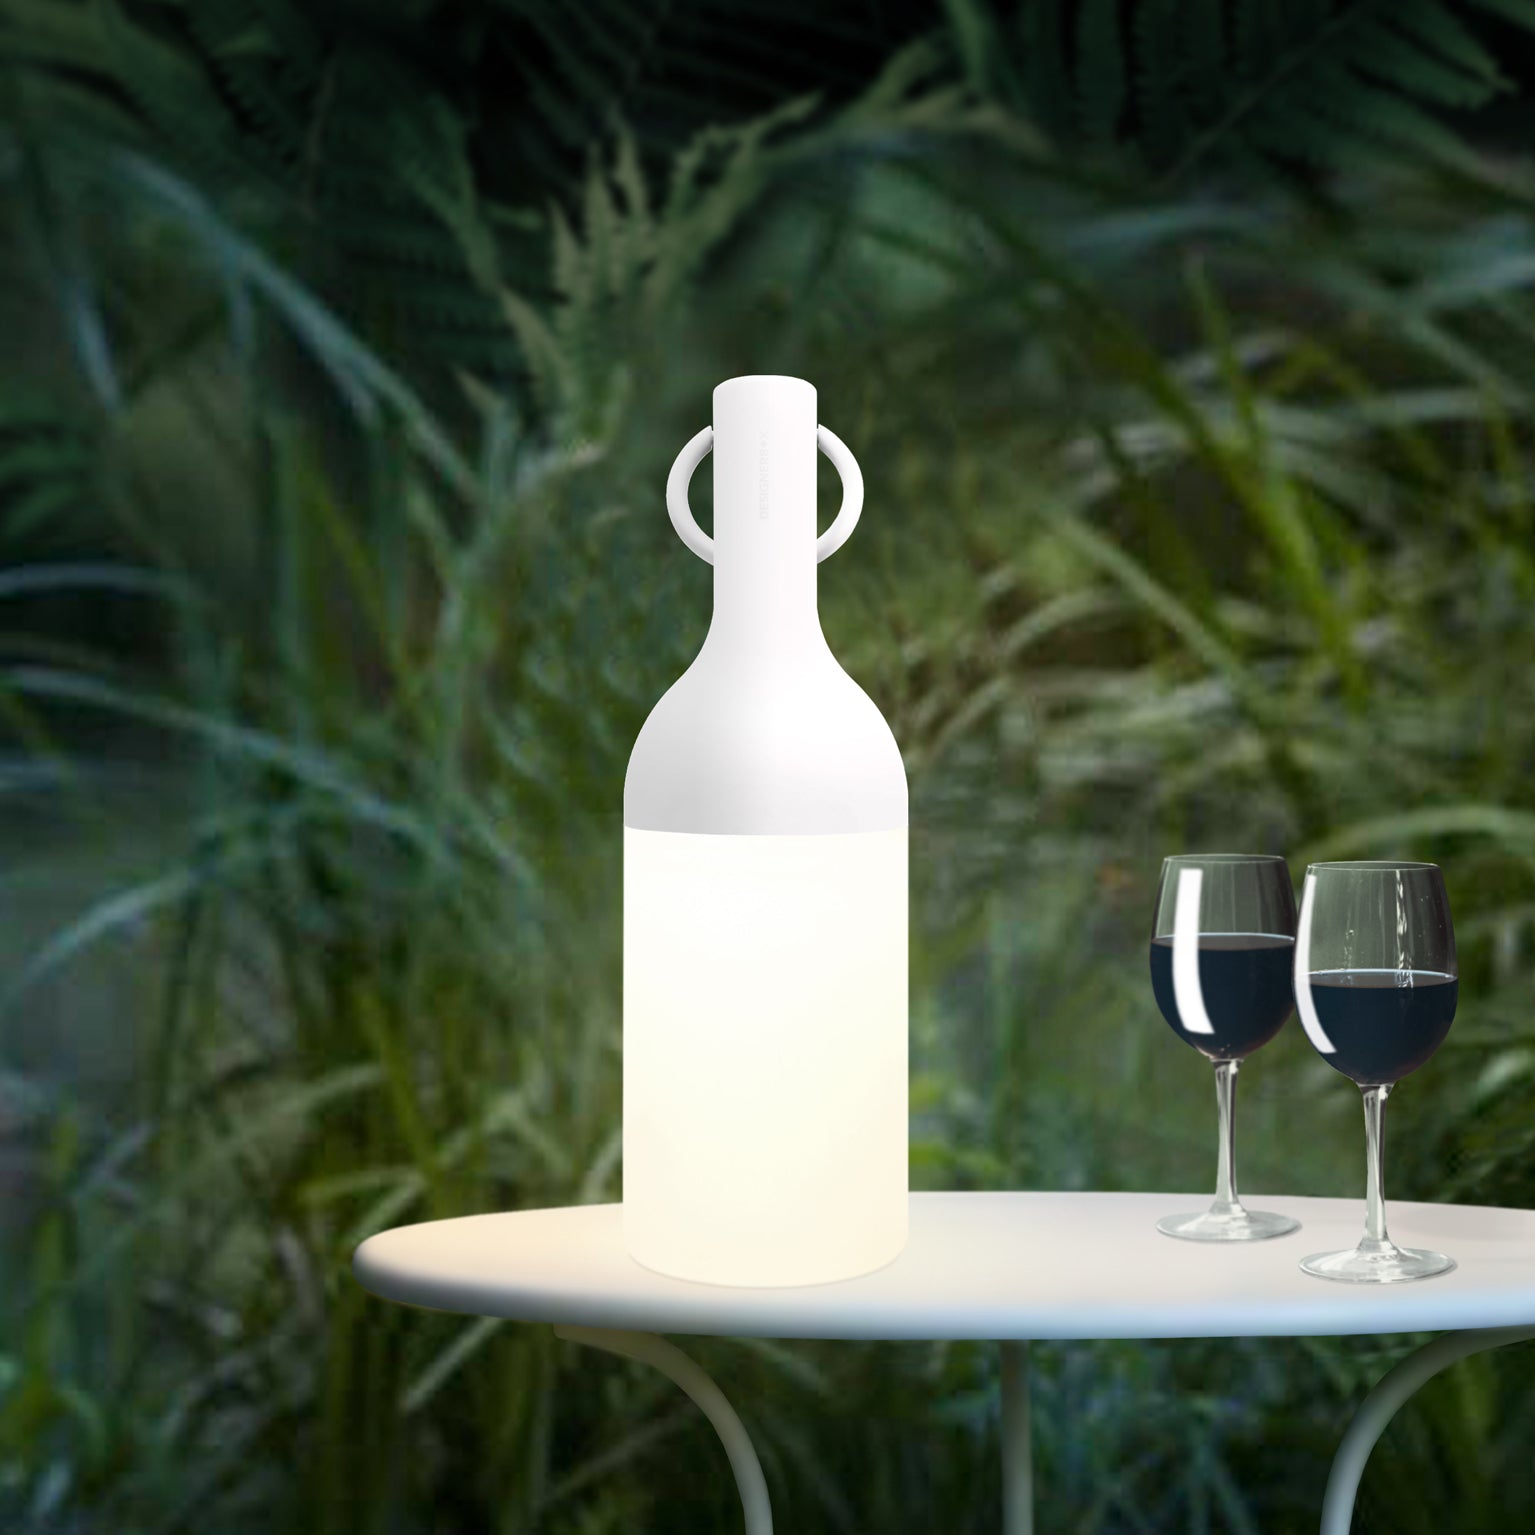 Get ready for the great outdoors with the ELO Rechargeable LED Portable Table Lamp from DesignerBox. Created with an eye toward French design by Bina Baitel, it starts with a handle that flares out into a dome shape, seating weatherproof and dimmable LED lamping inside a cylindrical, translucent shade that blocks excess glare, transforming it into a pleasant glow.